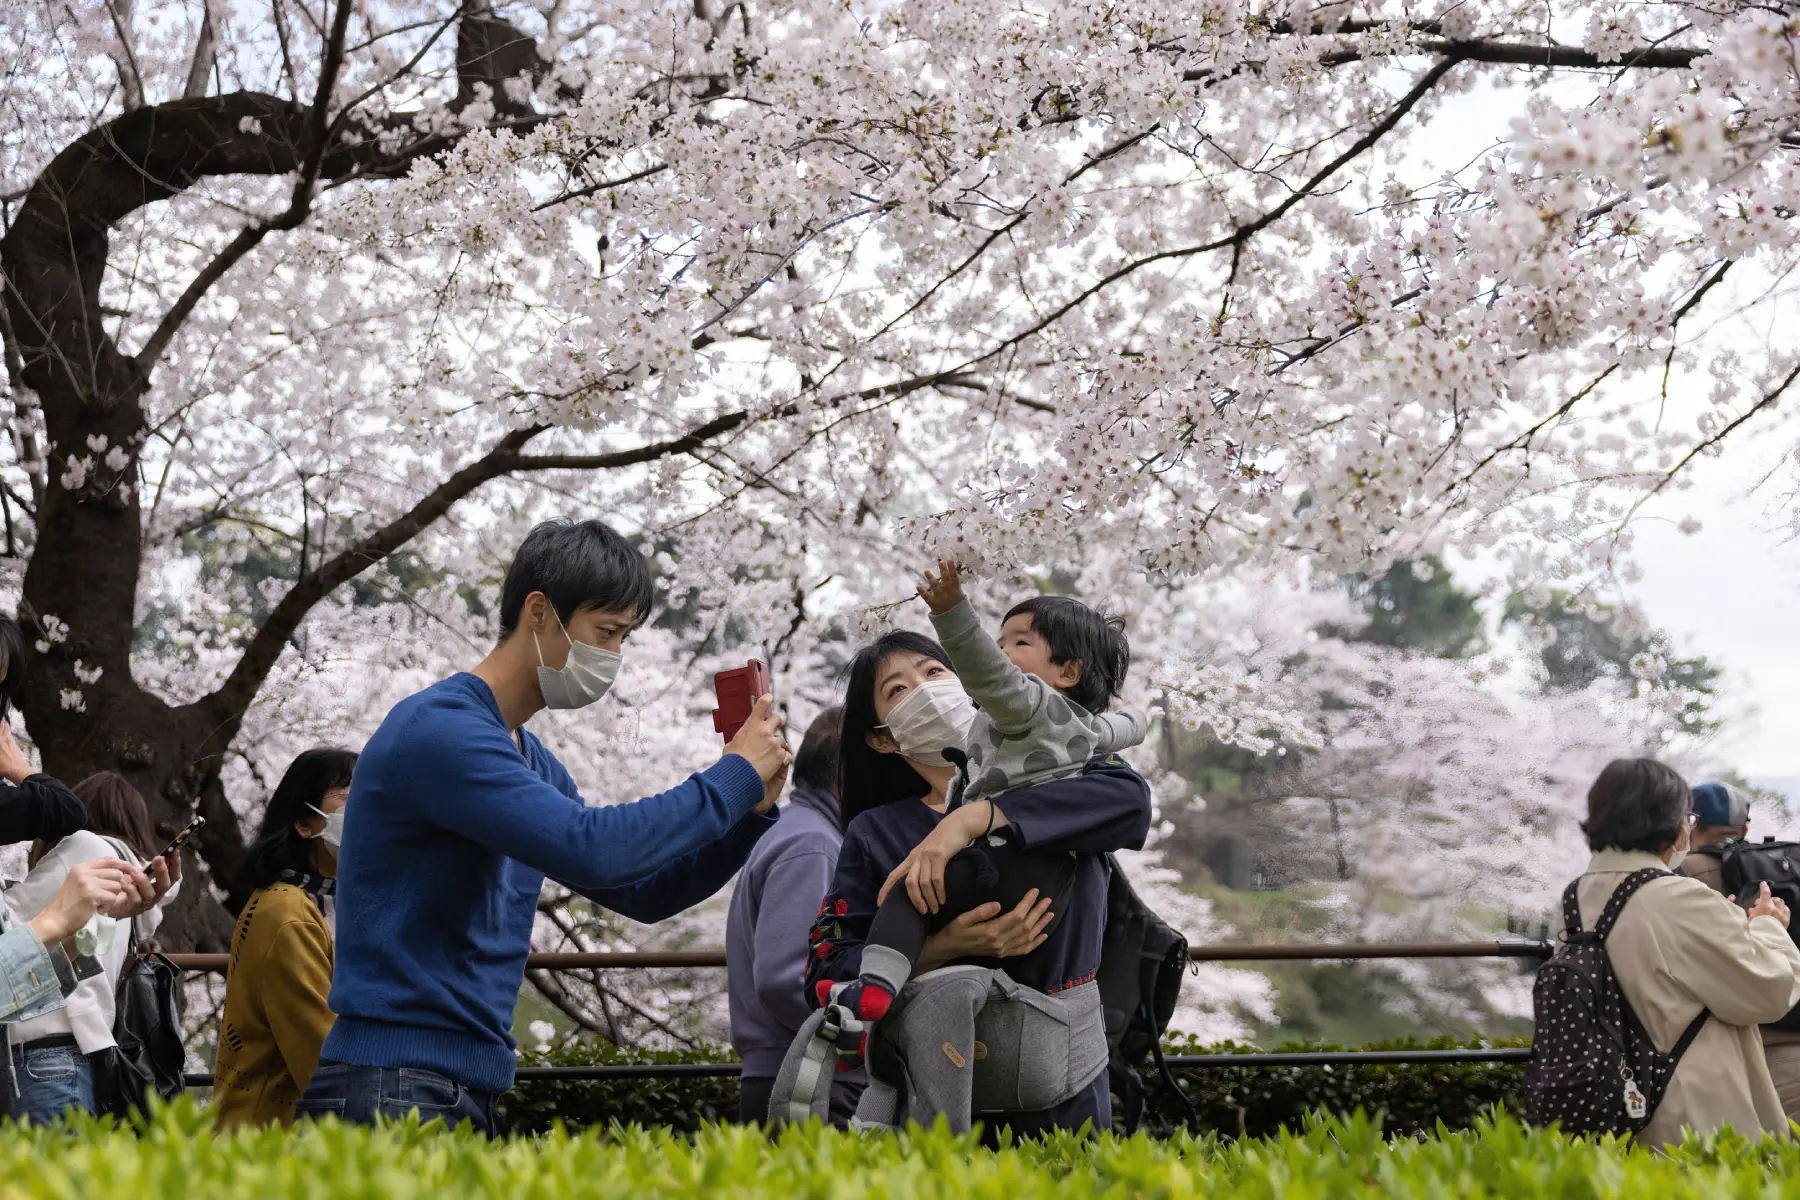 A mother holds a child while a father takes a photo at the Cherry Blossom Festival in Tokyo